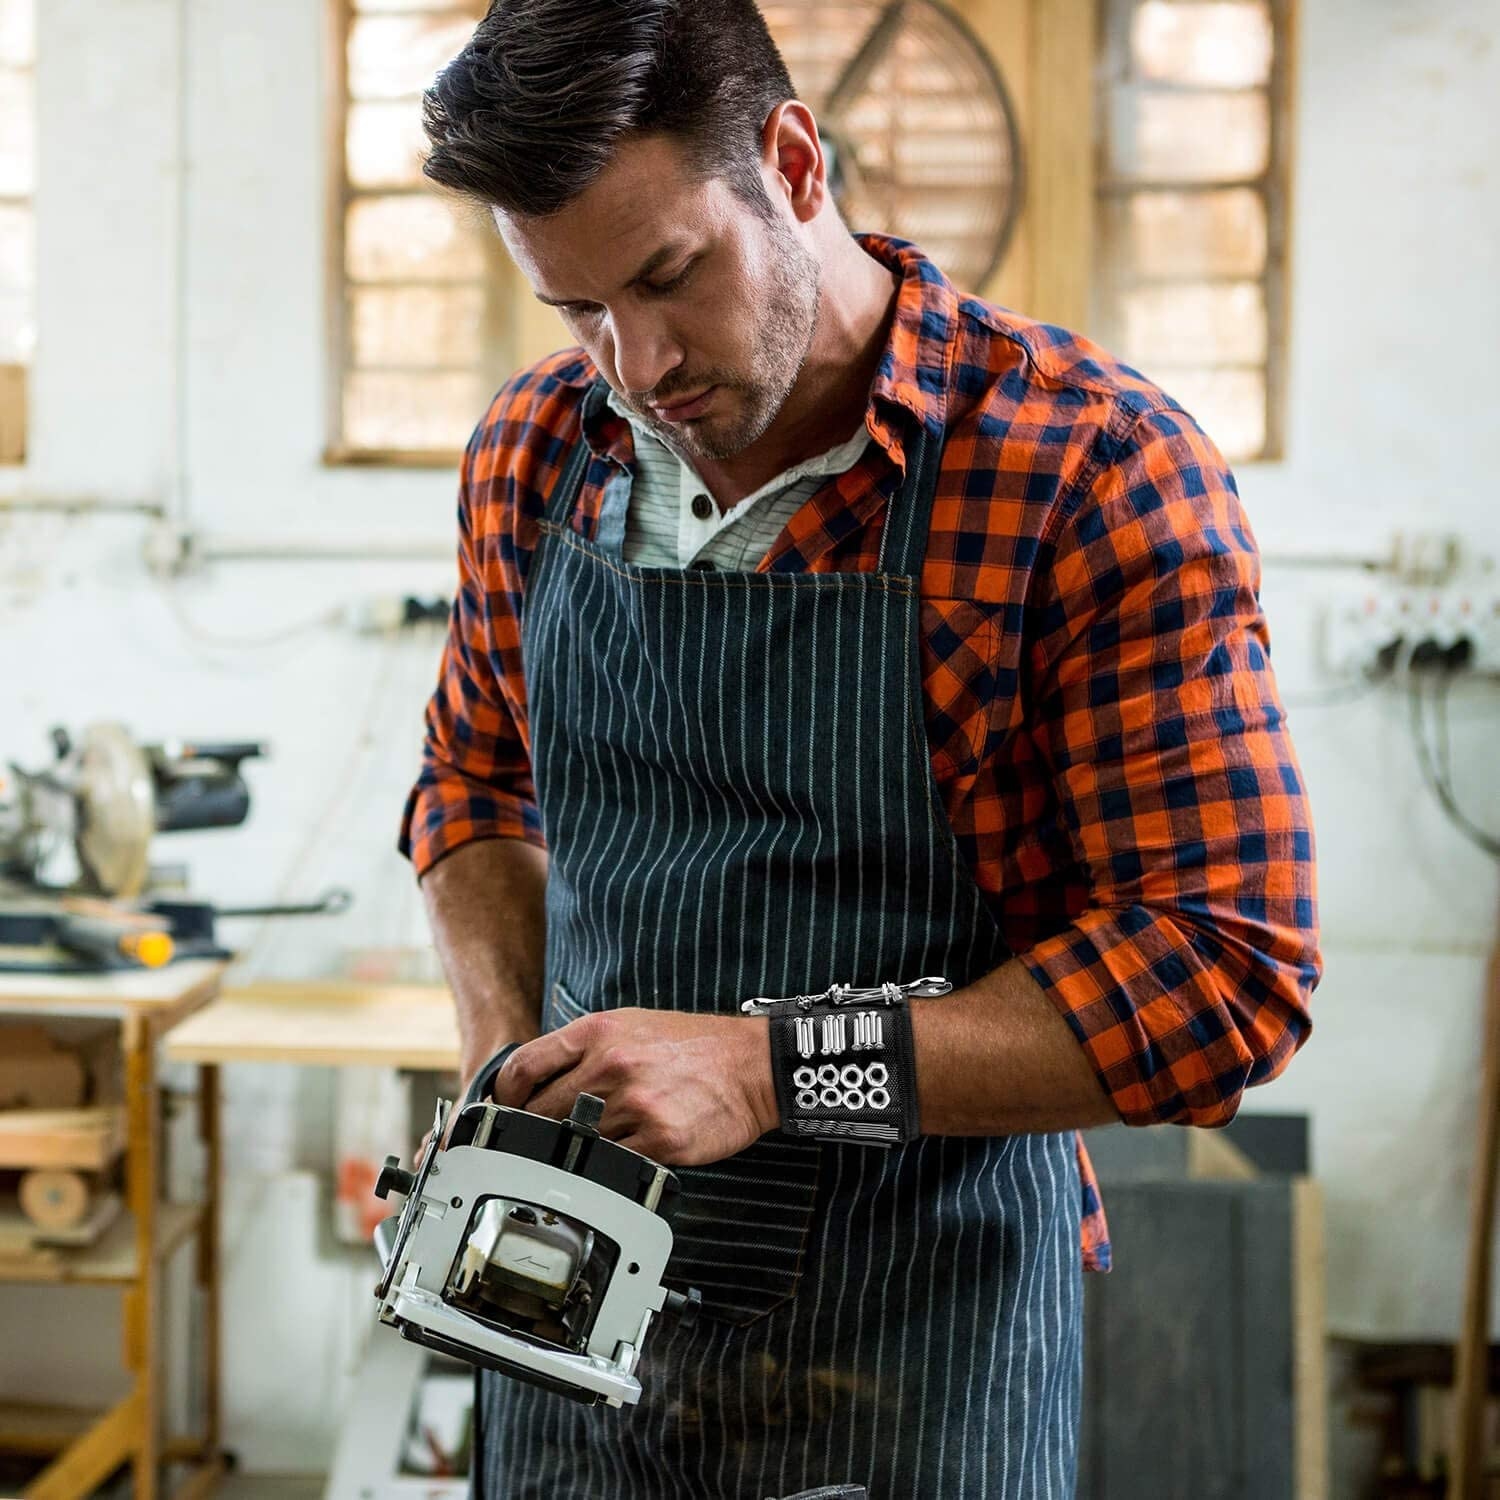 a person wearing the magnetic wristband while working with power tools